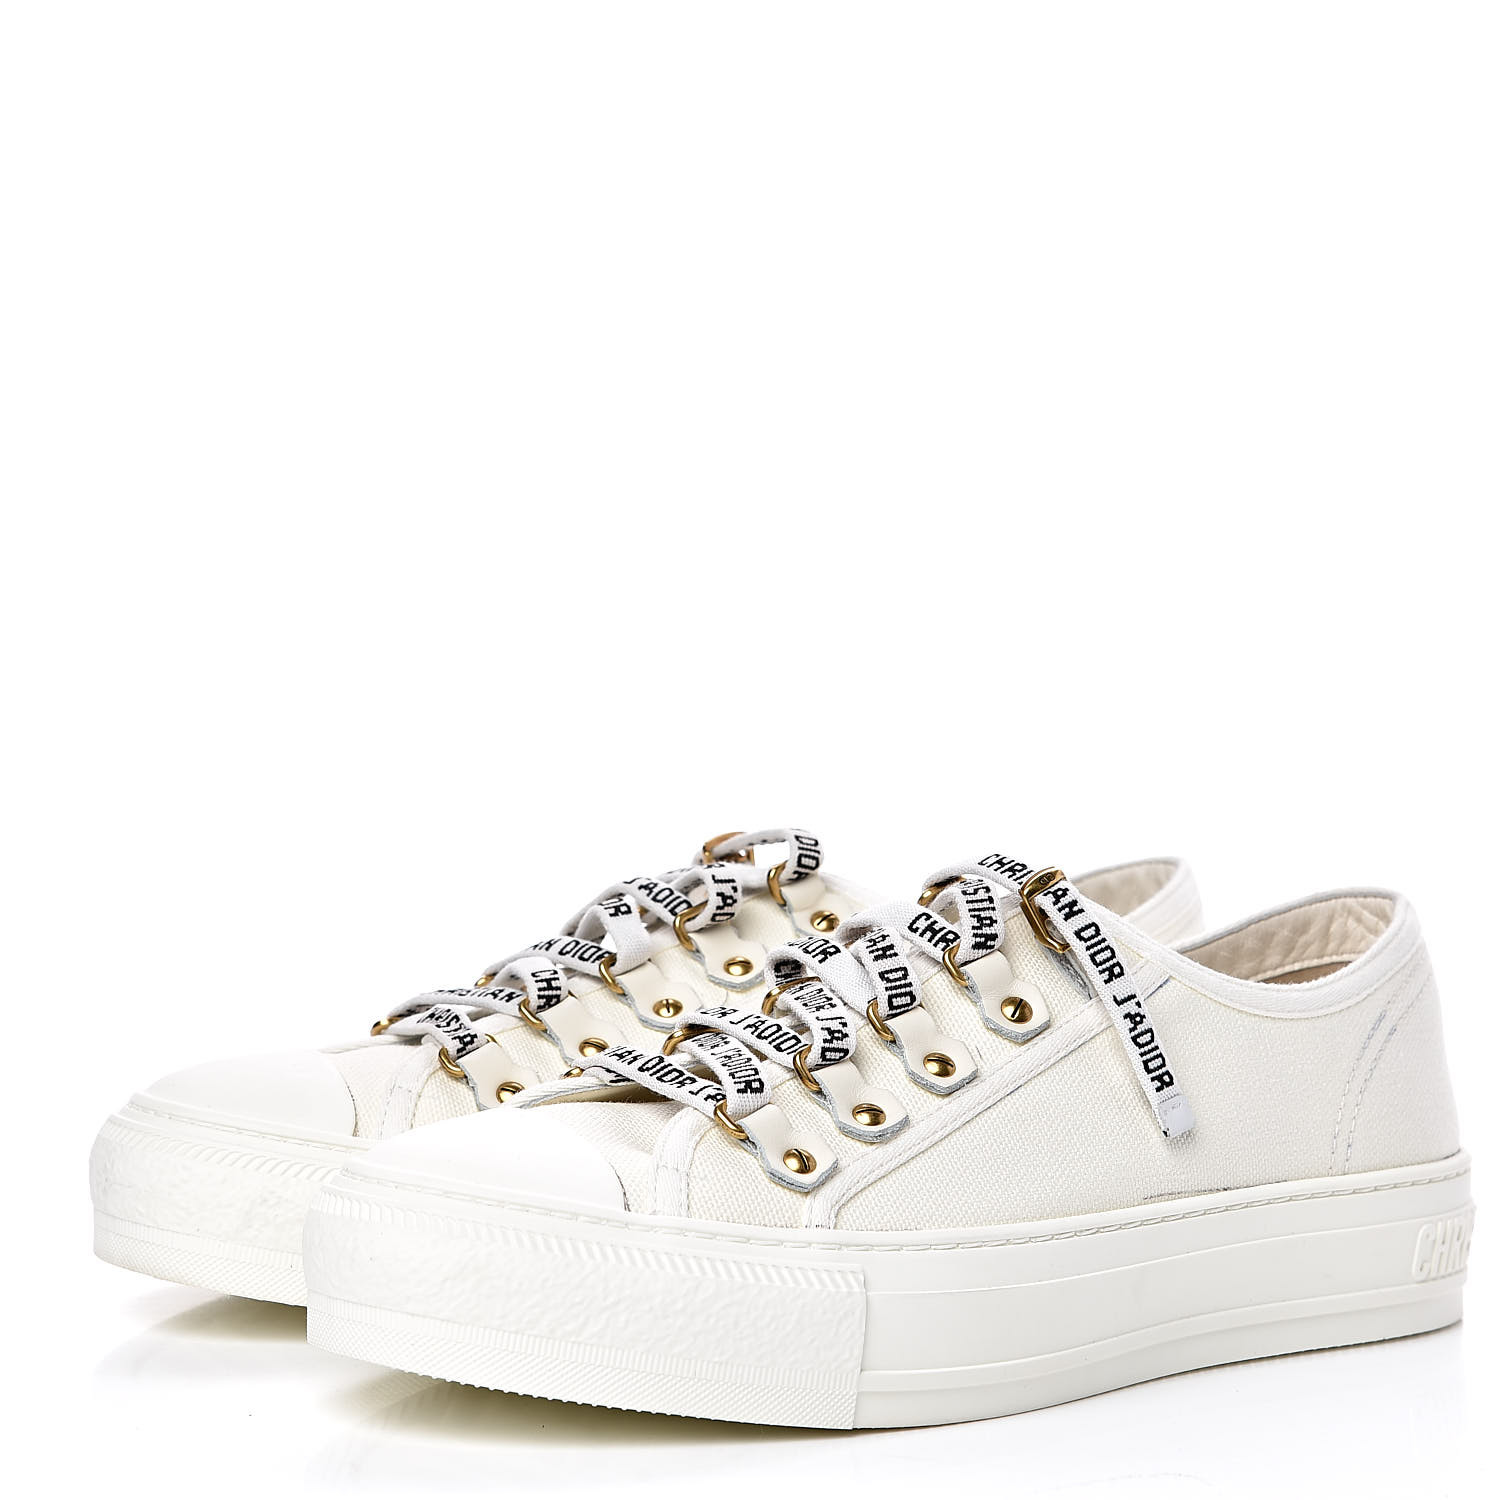 CHRISTIAN DIOR Canvas Walk'n Dior Low Top Sneakers 37.5 White 533390